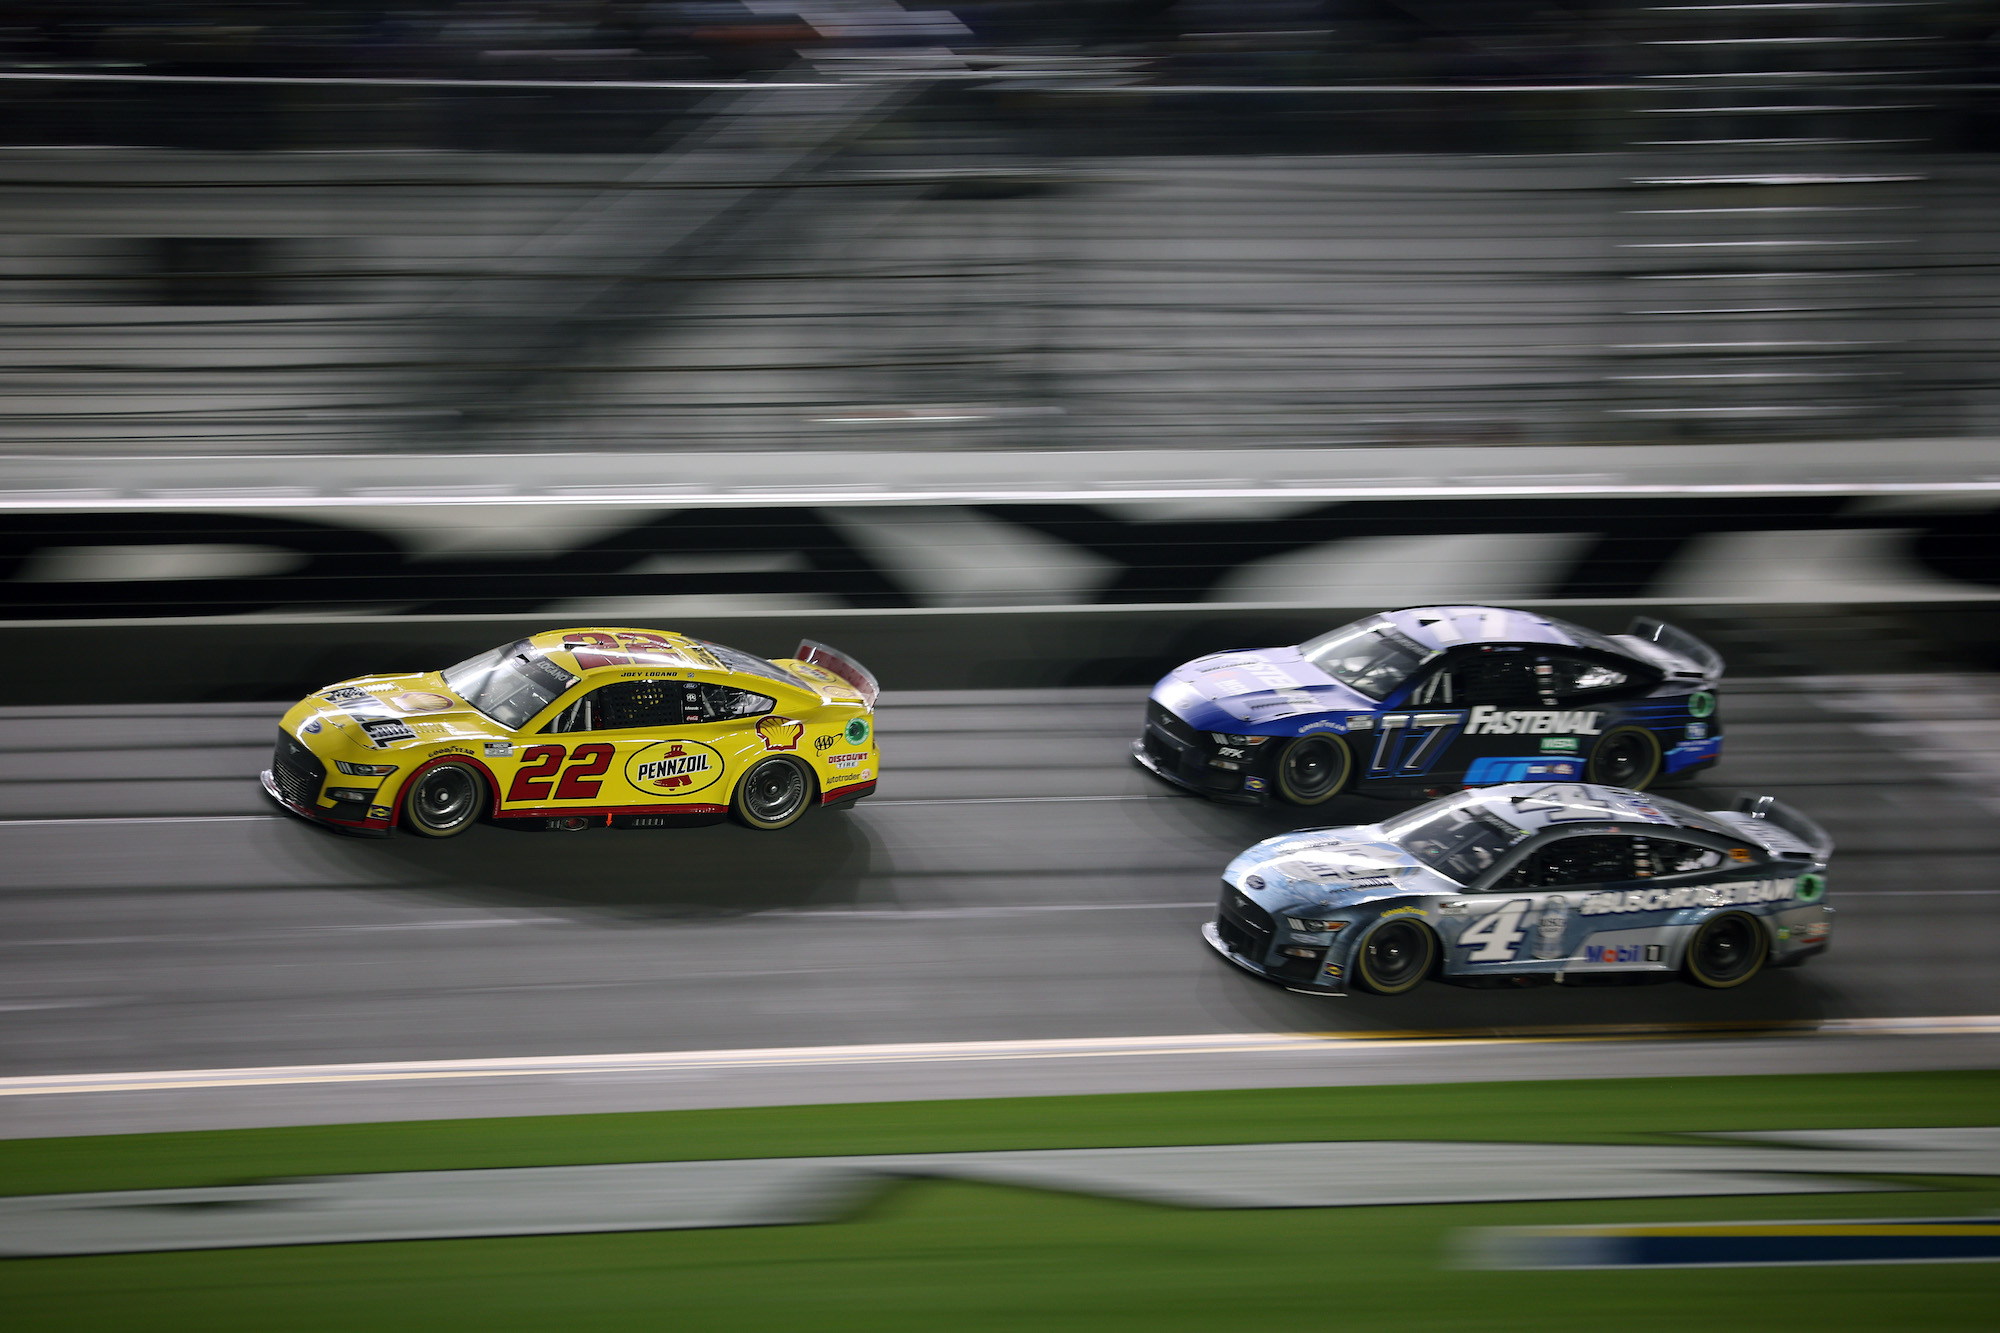 Joey Logano races Chris Buescher and Kevin Harvick